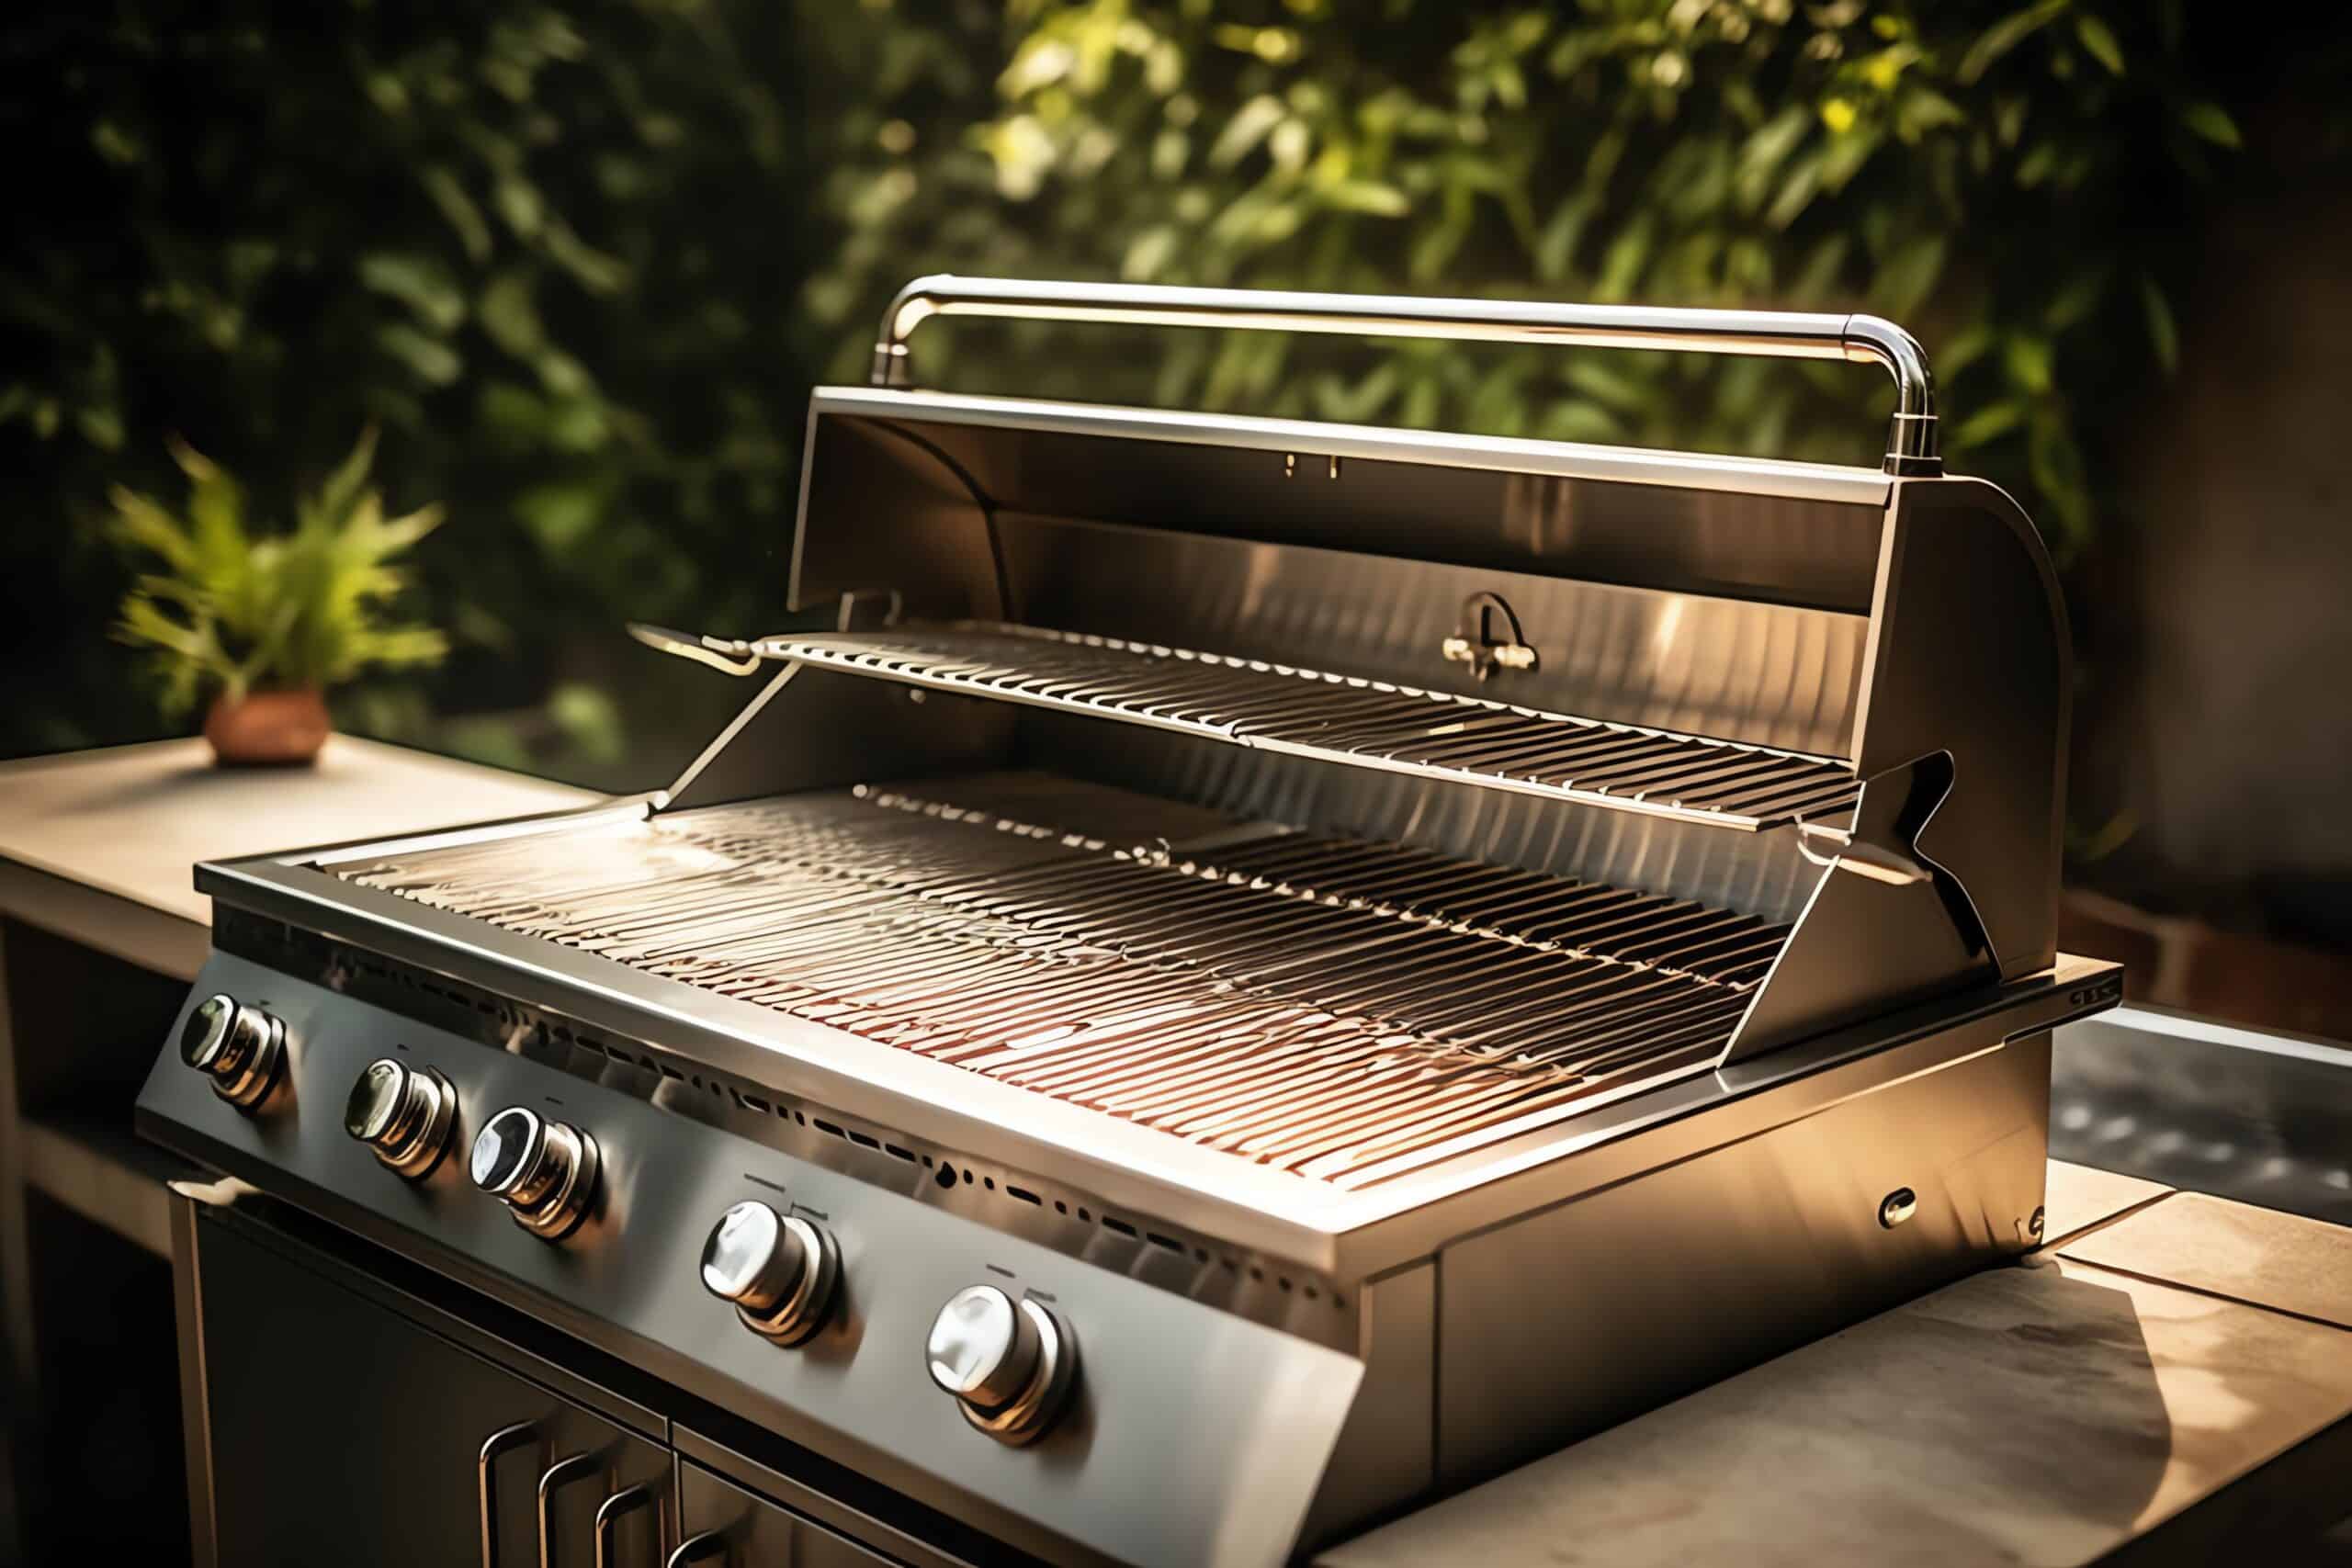 www.appr.com : Why Is My Grill Not Getting Gas?